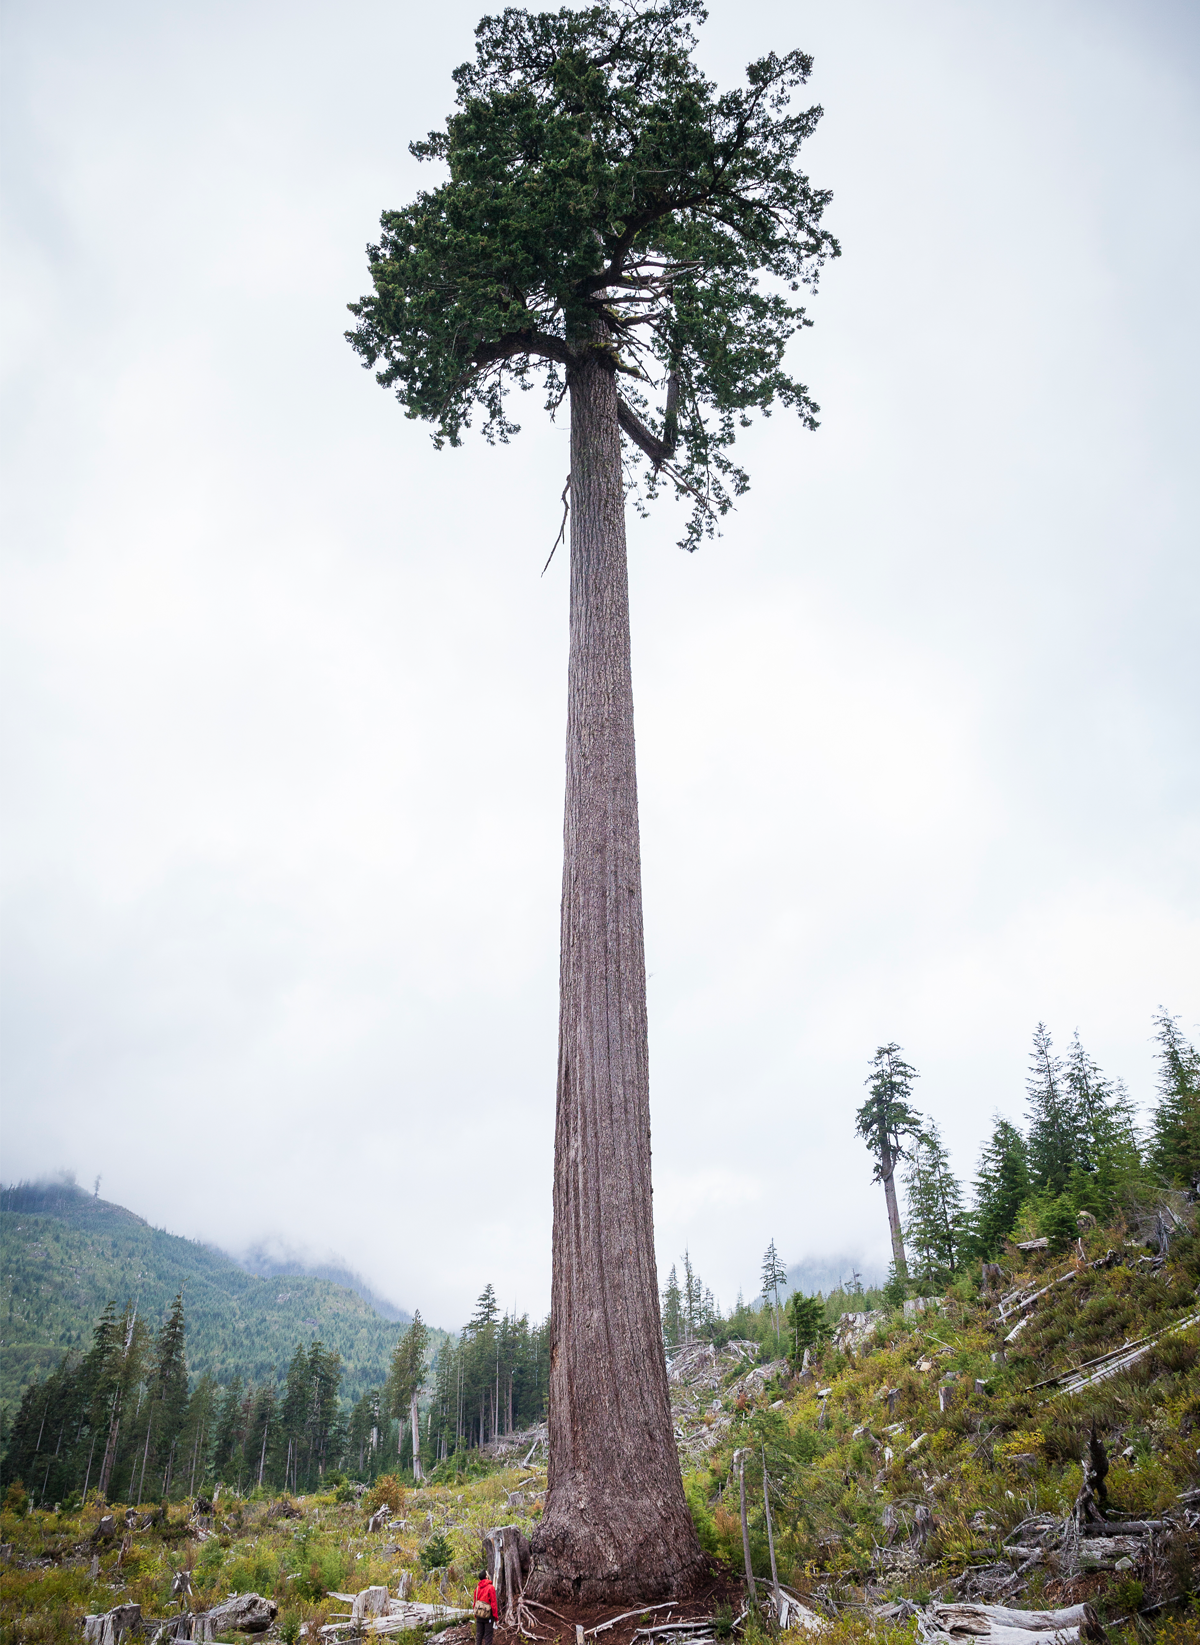 After surviving a clearcutting in 2011, Canada’s second-tallest Douglas fir helped reignite old-growth-forest conservation.